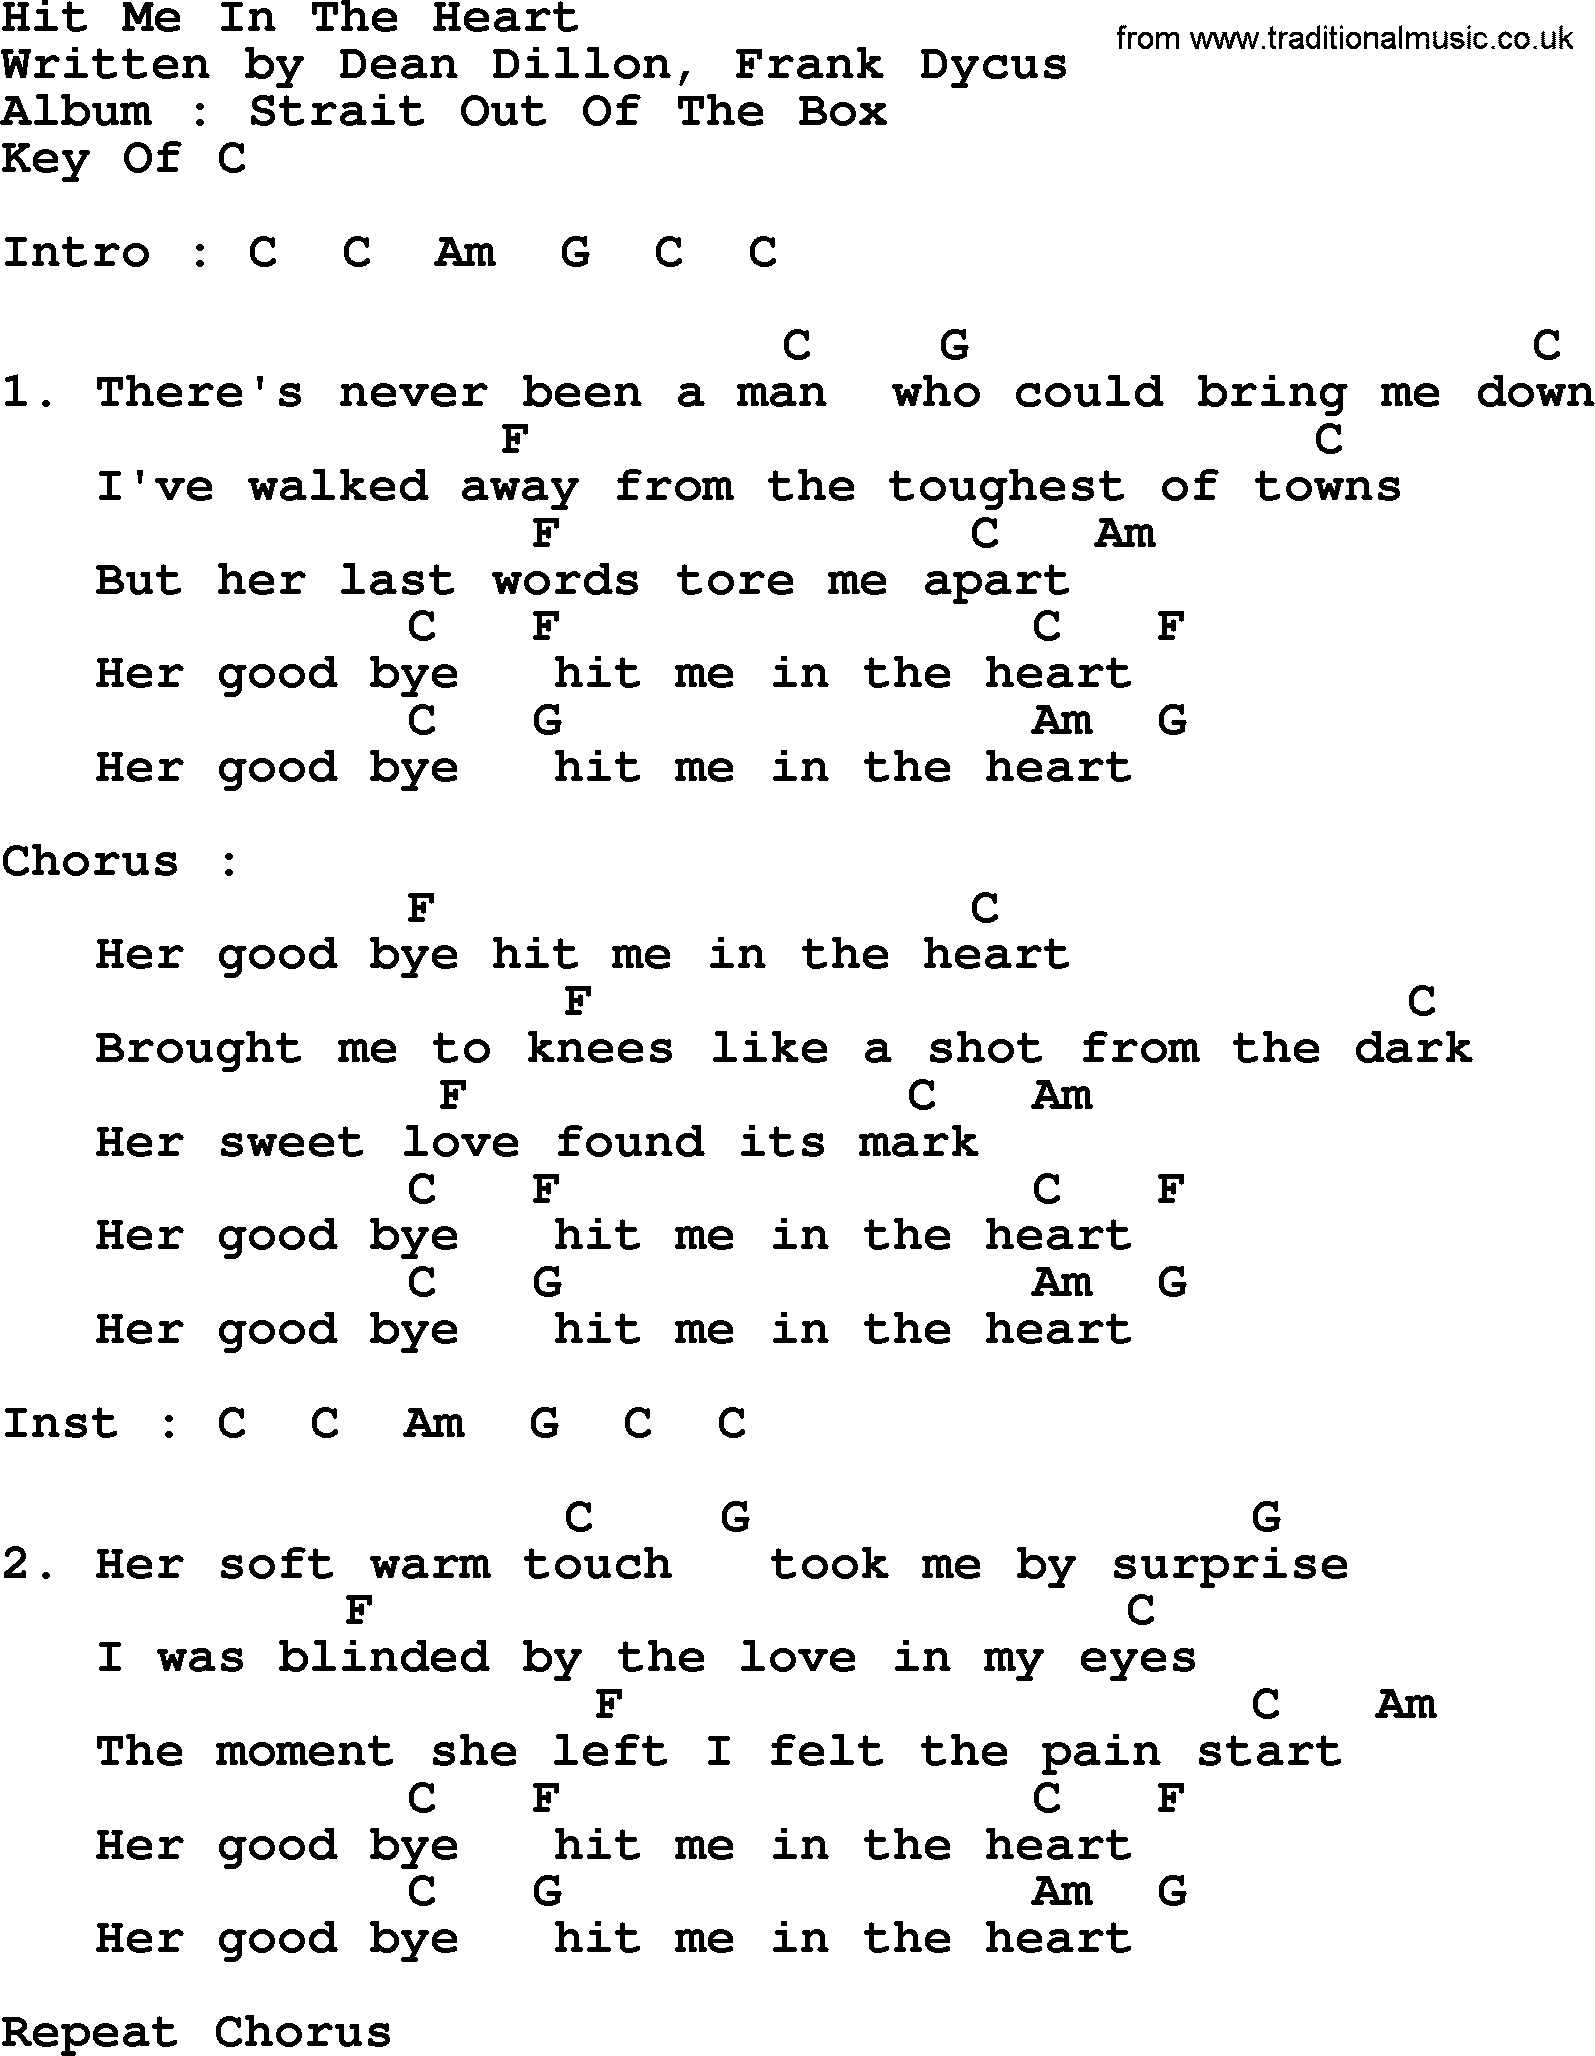 George Strait song: Hit Me In The Heart, lyrics and chords